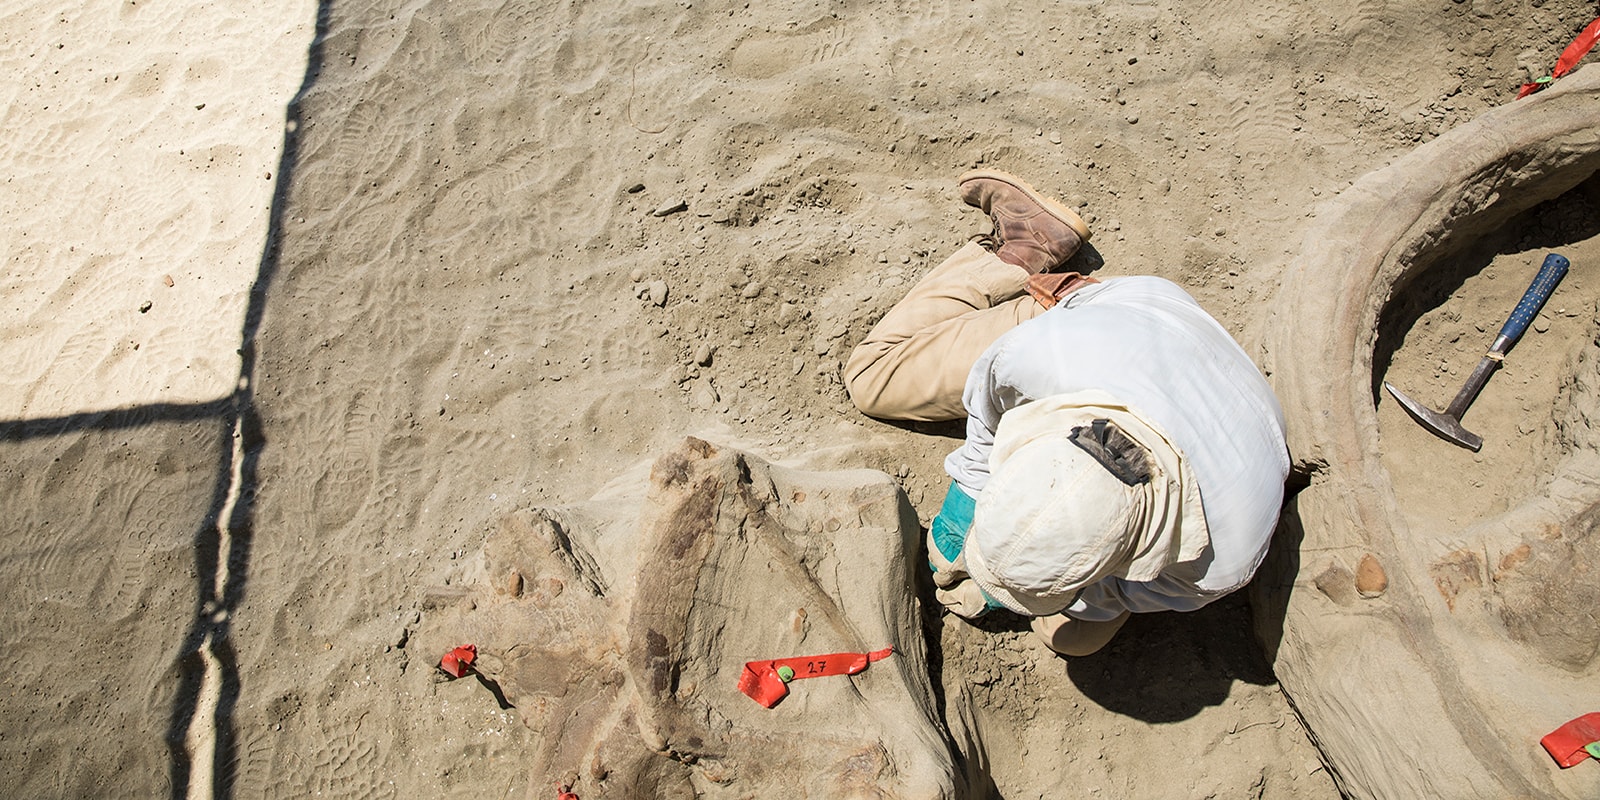 A man wearing a white head covering to protect from the sun digging surrounded by t. rex bones